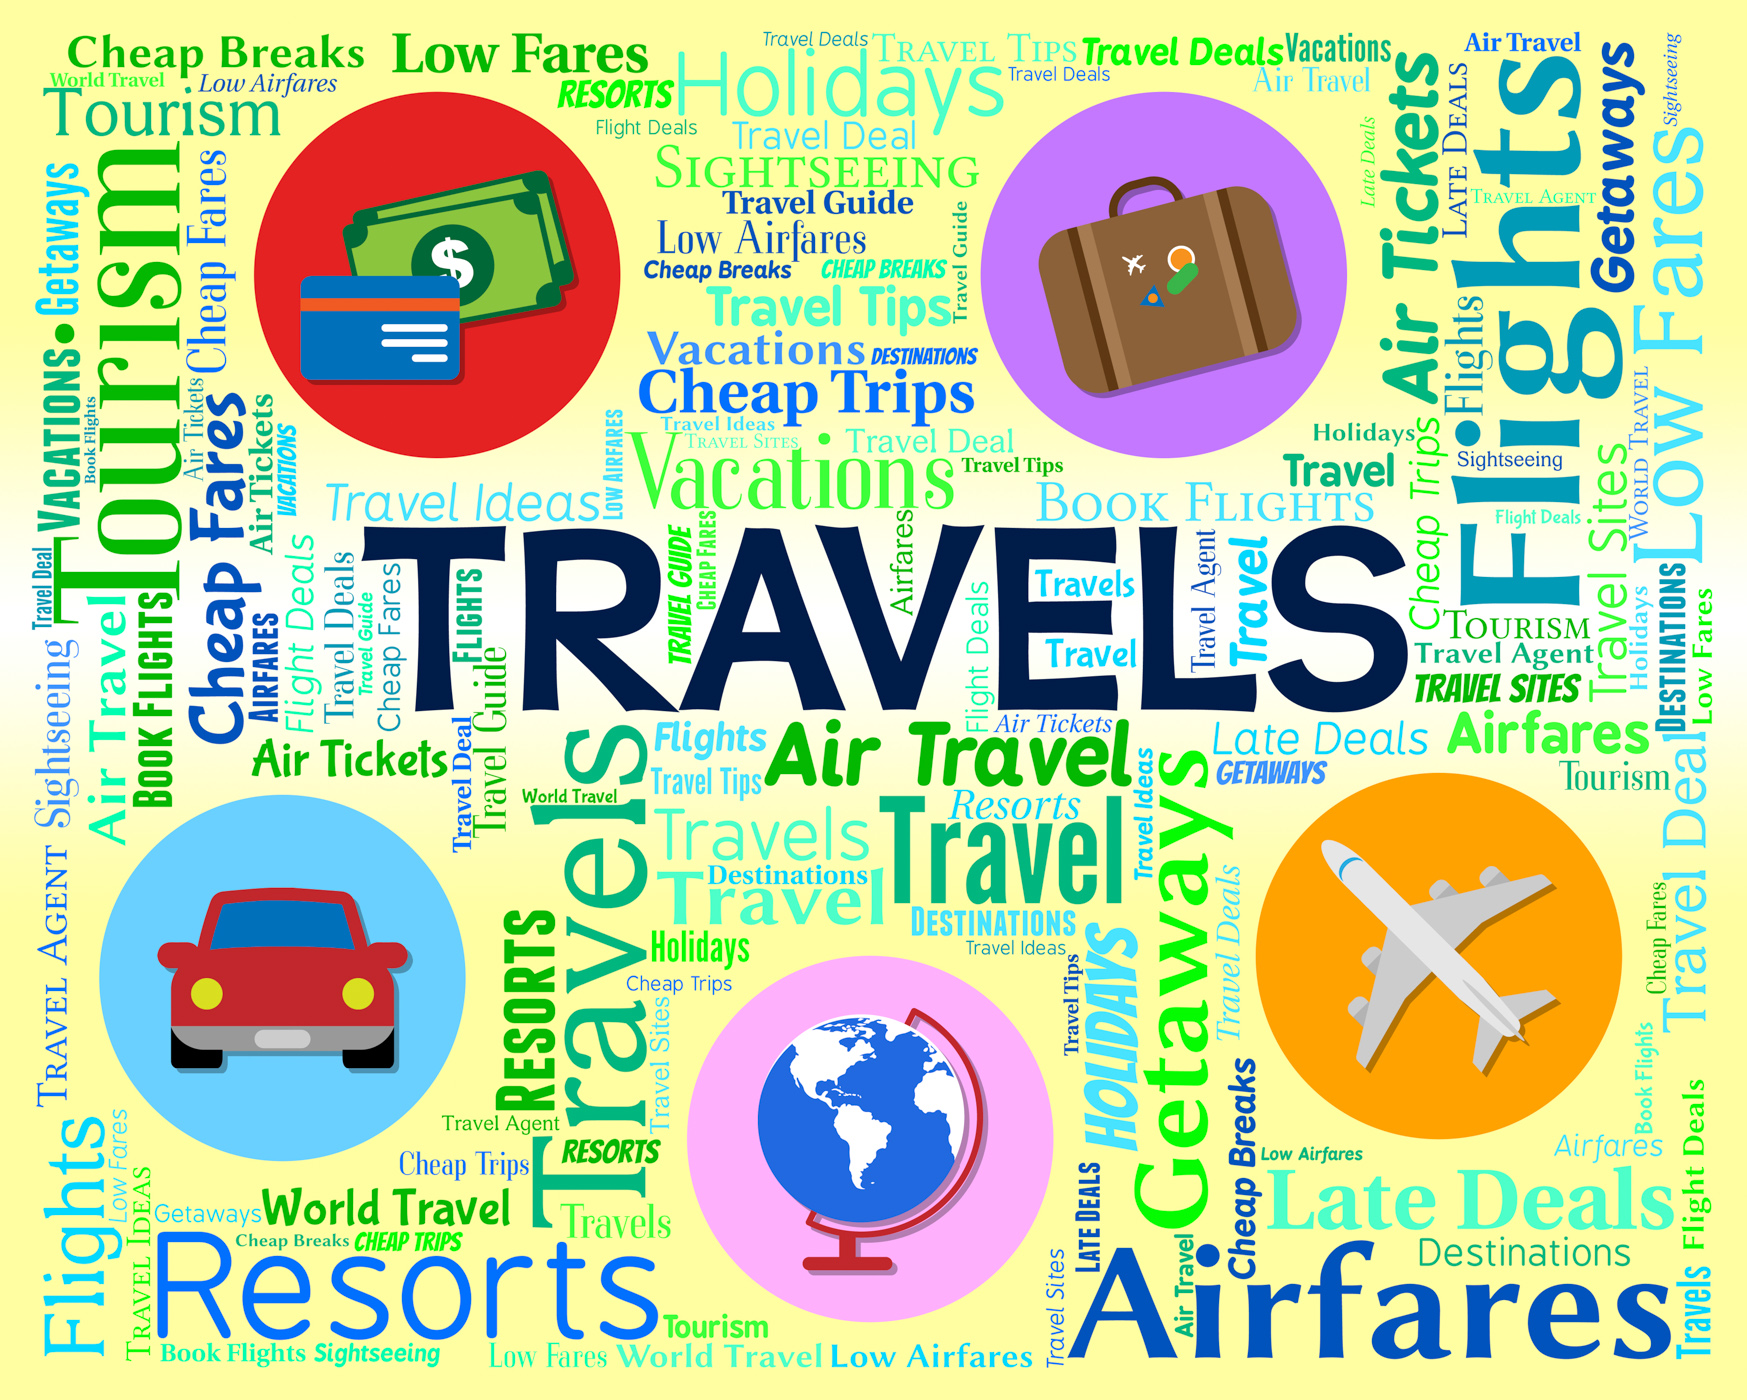 Tourism words. Travel Words. Cheap and deal. Про выставку thetravtl and vacation show. Trip Journey Travel.